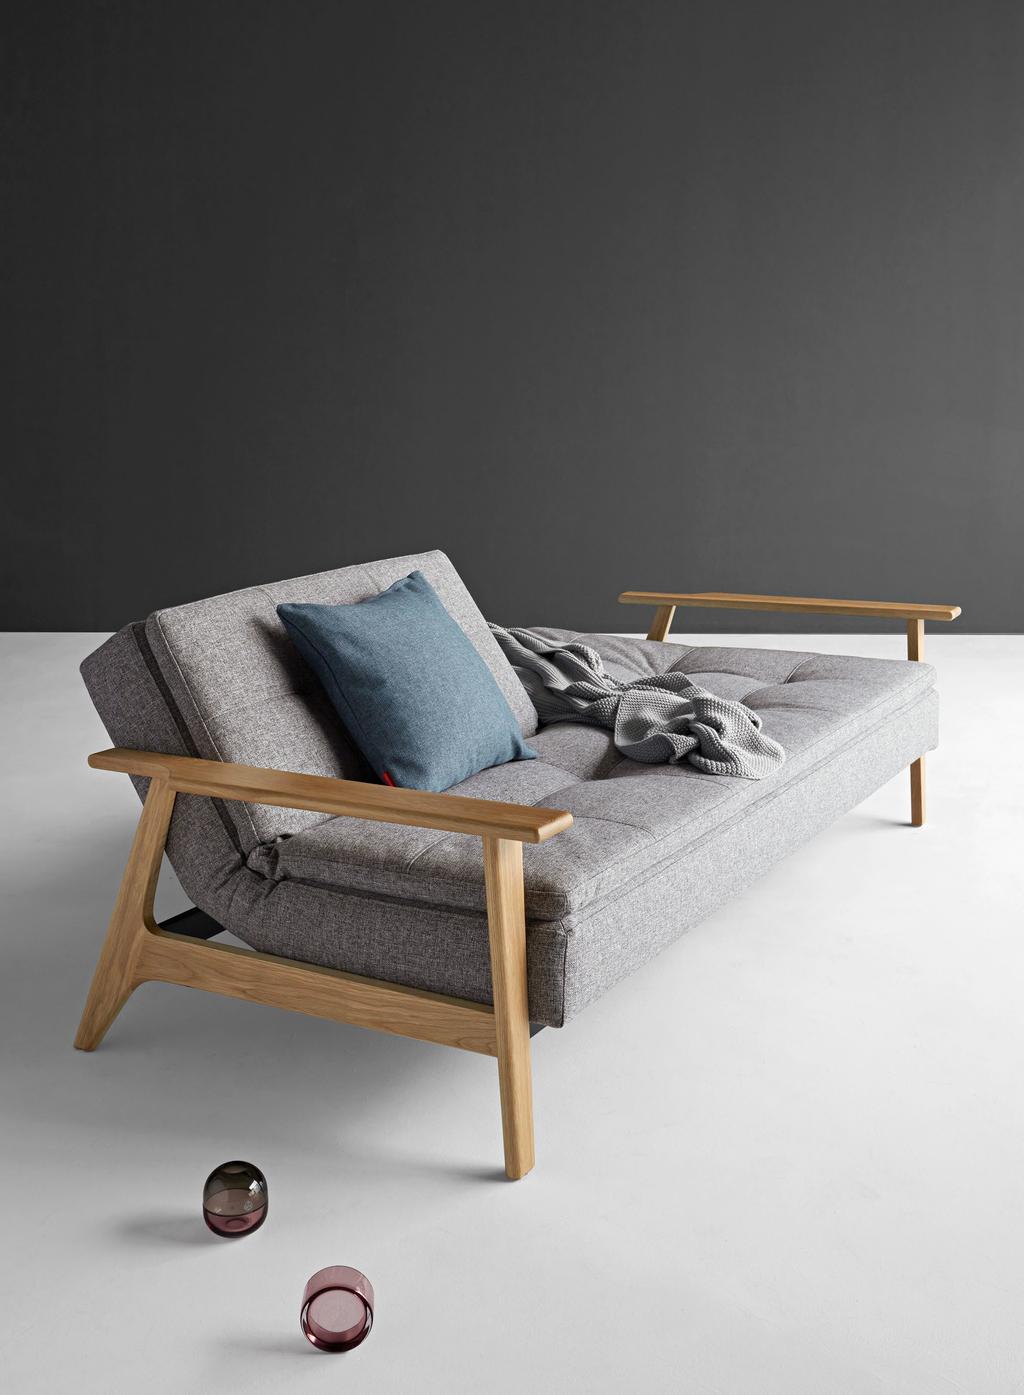 Dublexo Frej sofa bed Design by Oliver WeissKrogh & Per Weiss The Dublexo sofa bed is